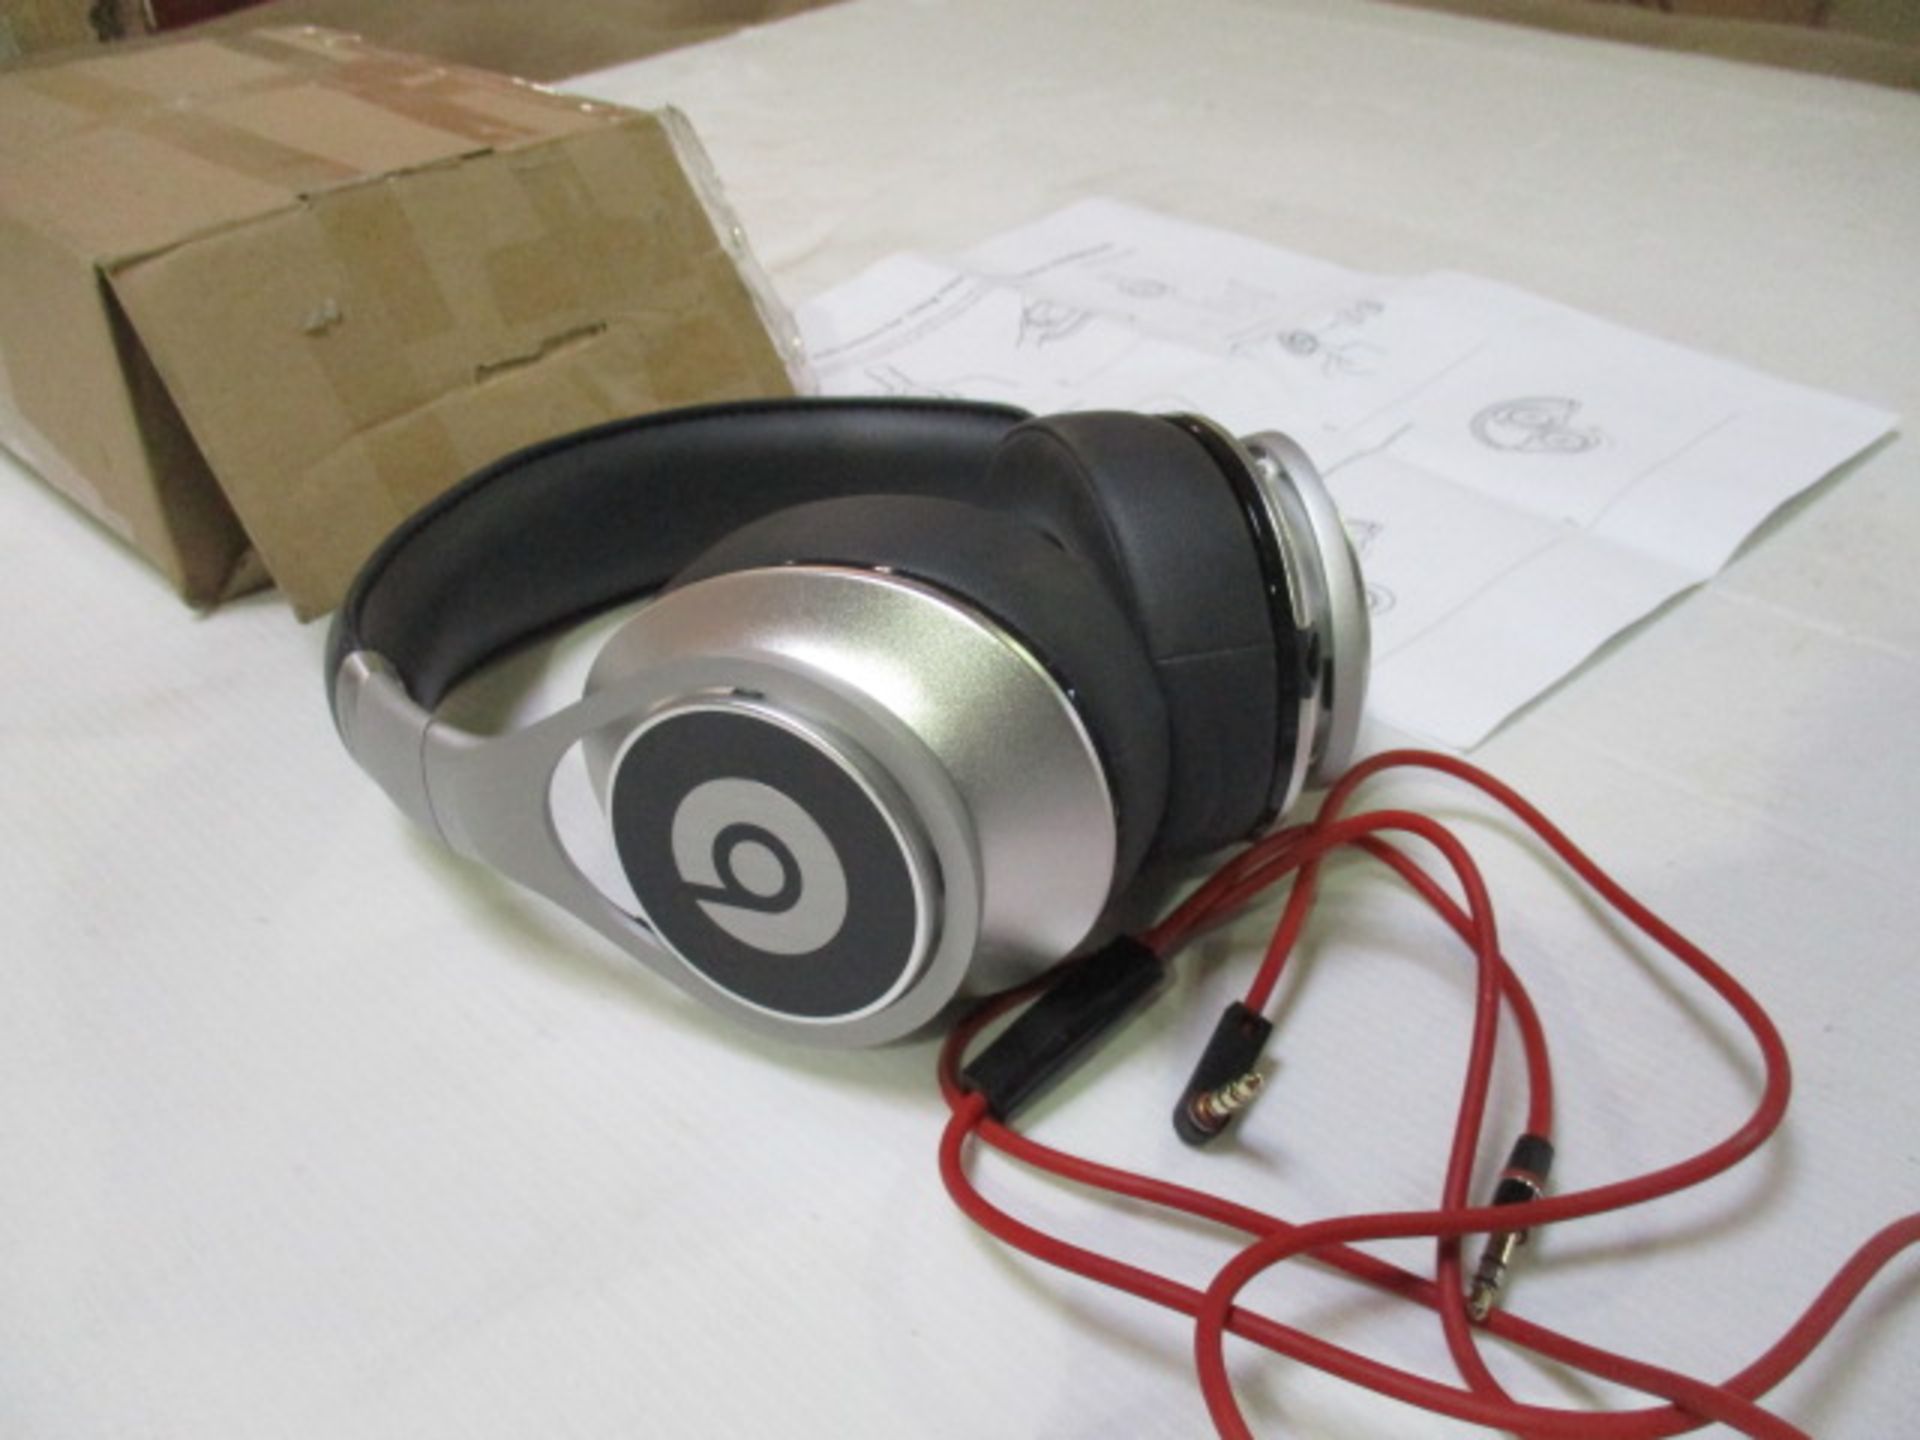 Beats Headfones as pictured unknown reason return - boxed